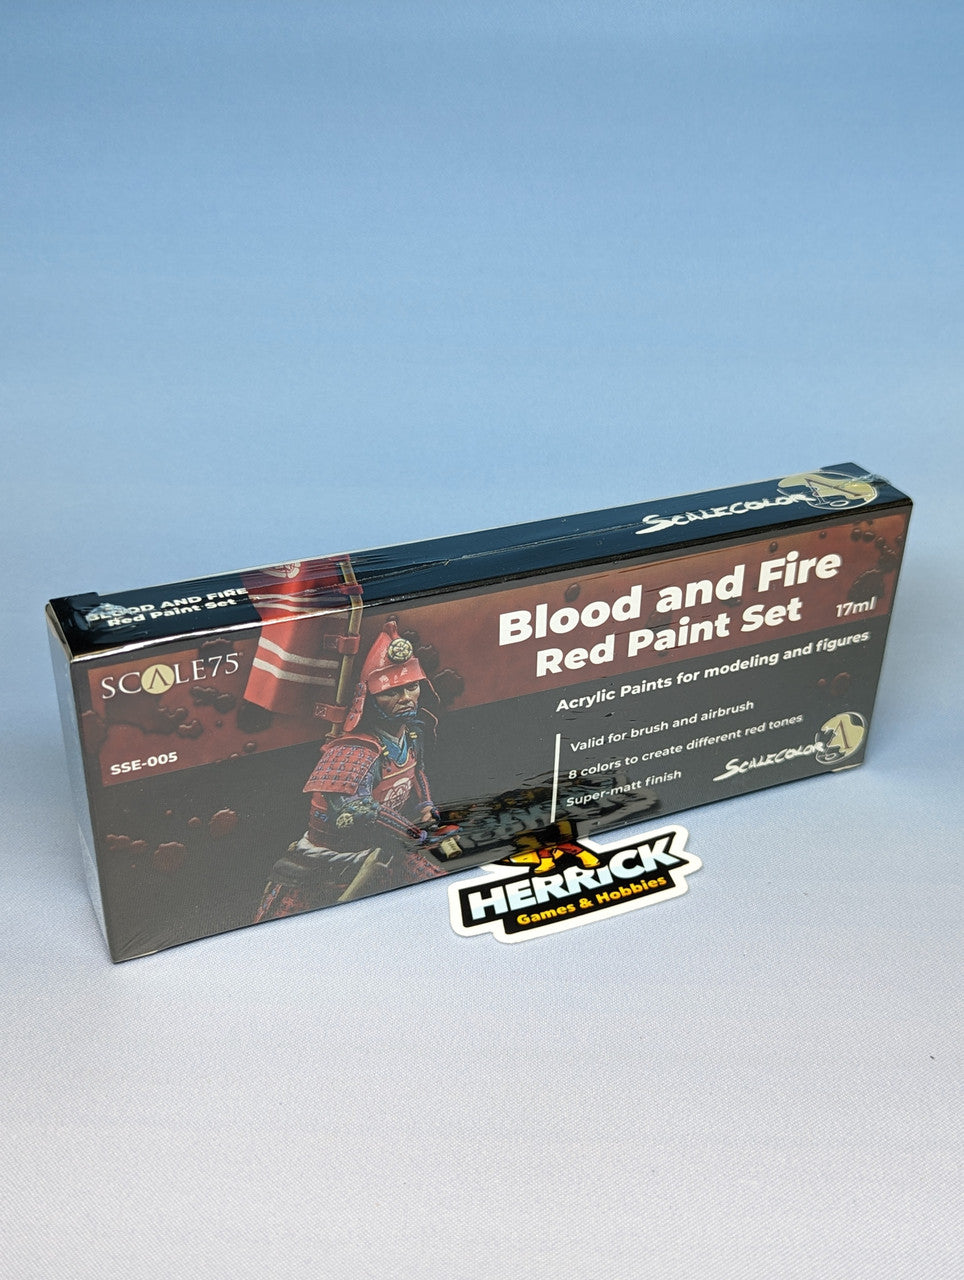 Scale75: Blood and Fire Red Paint Set